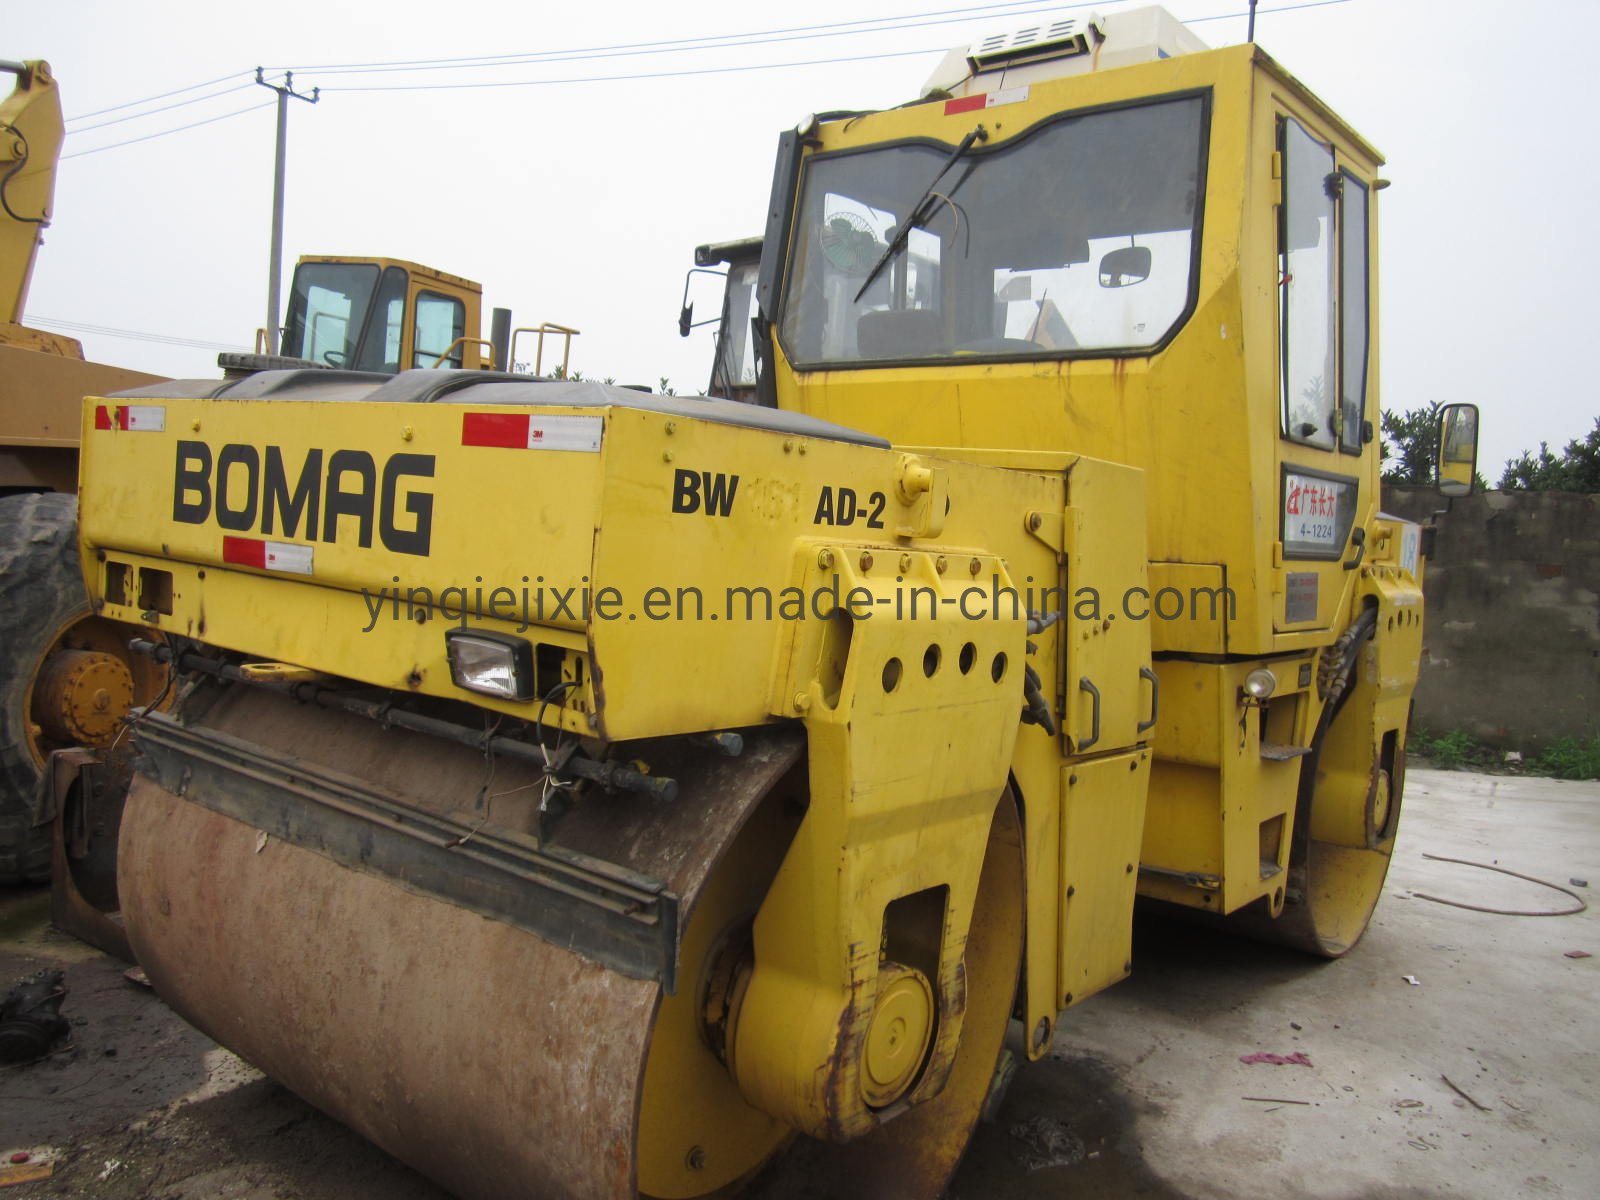 Used Bomag Road Roller Bw202ad-2 (Bomag BW213, BW214, BW217)